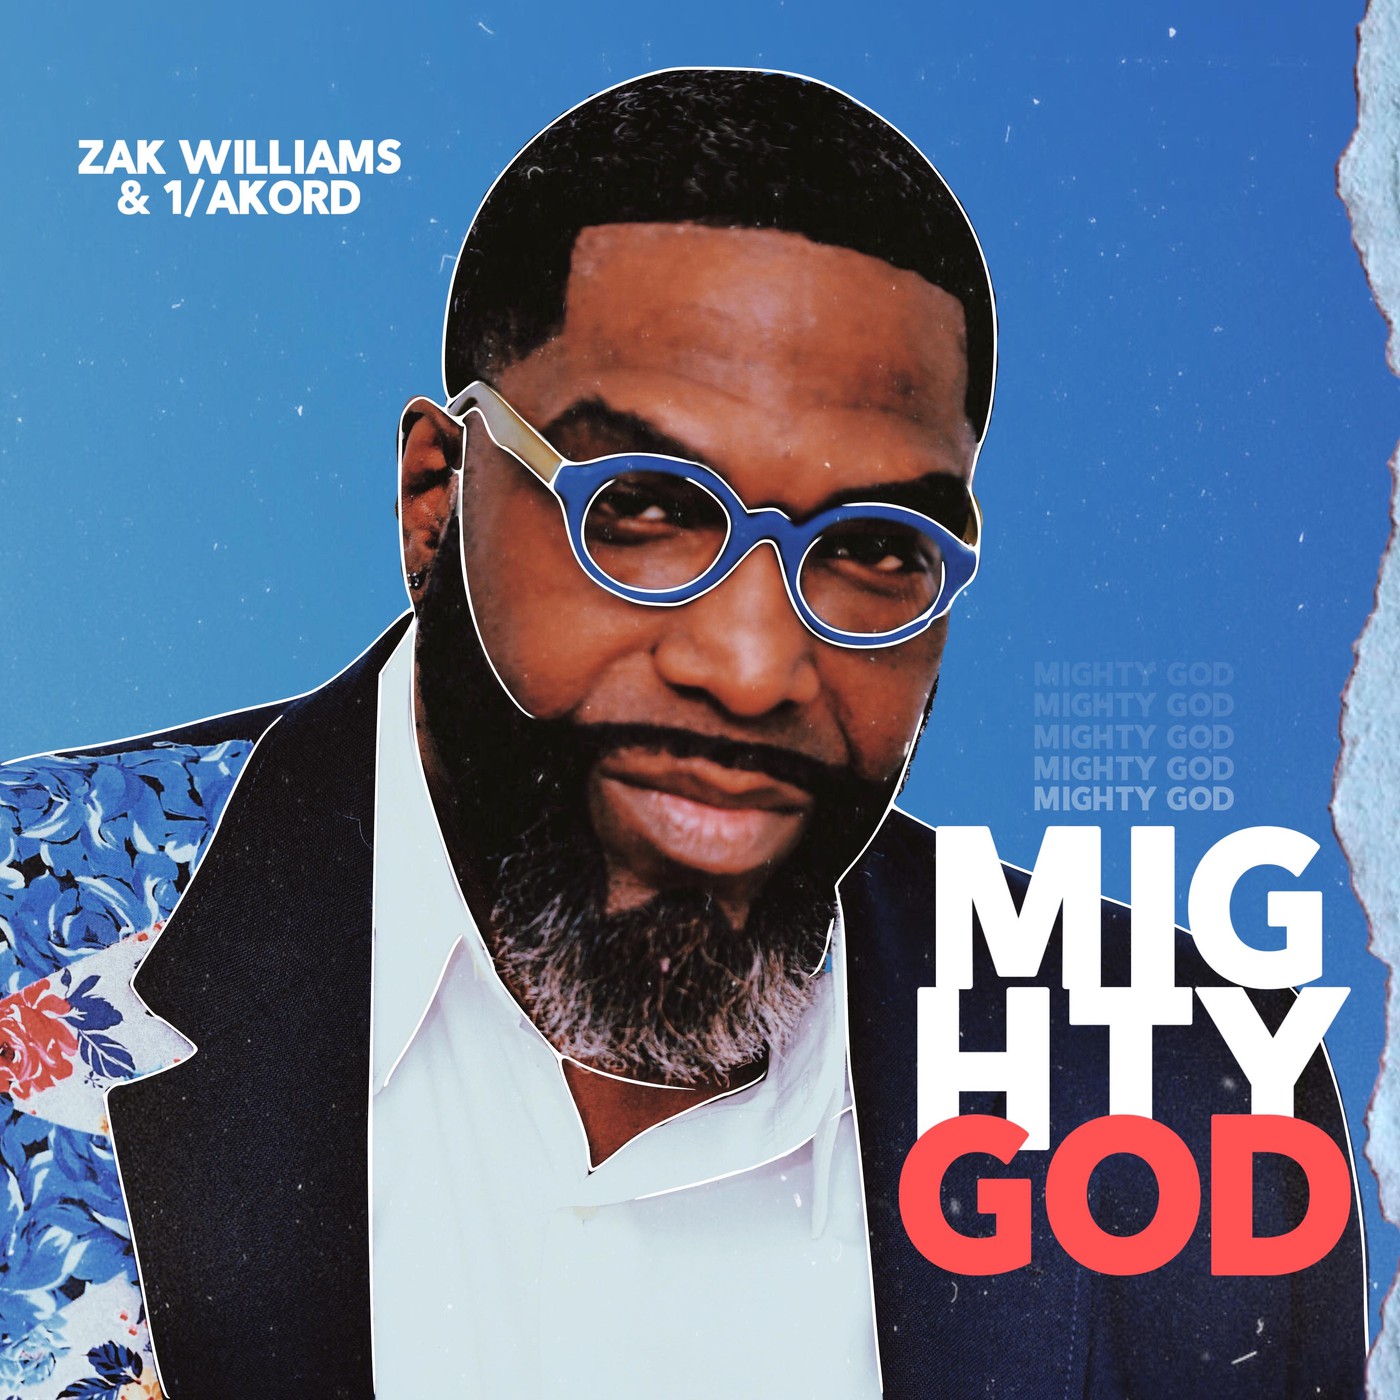 Art for Mighty God by Zak Williams & 1 Akord